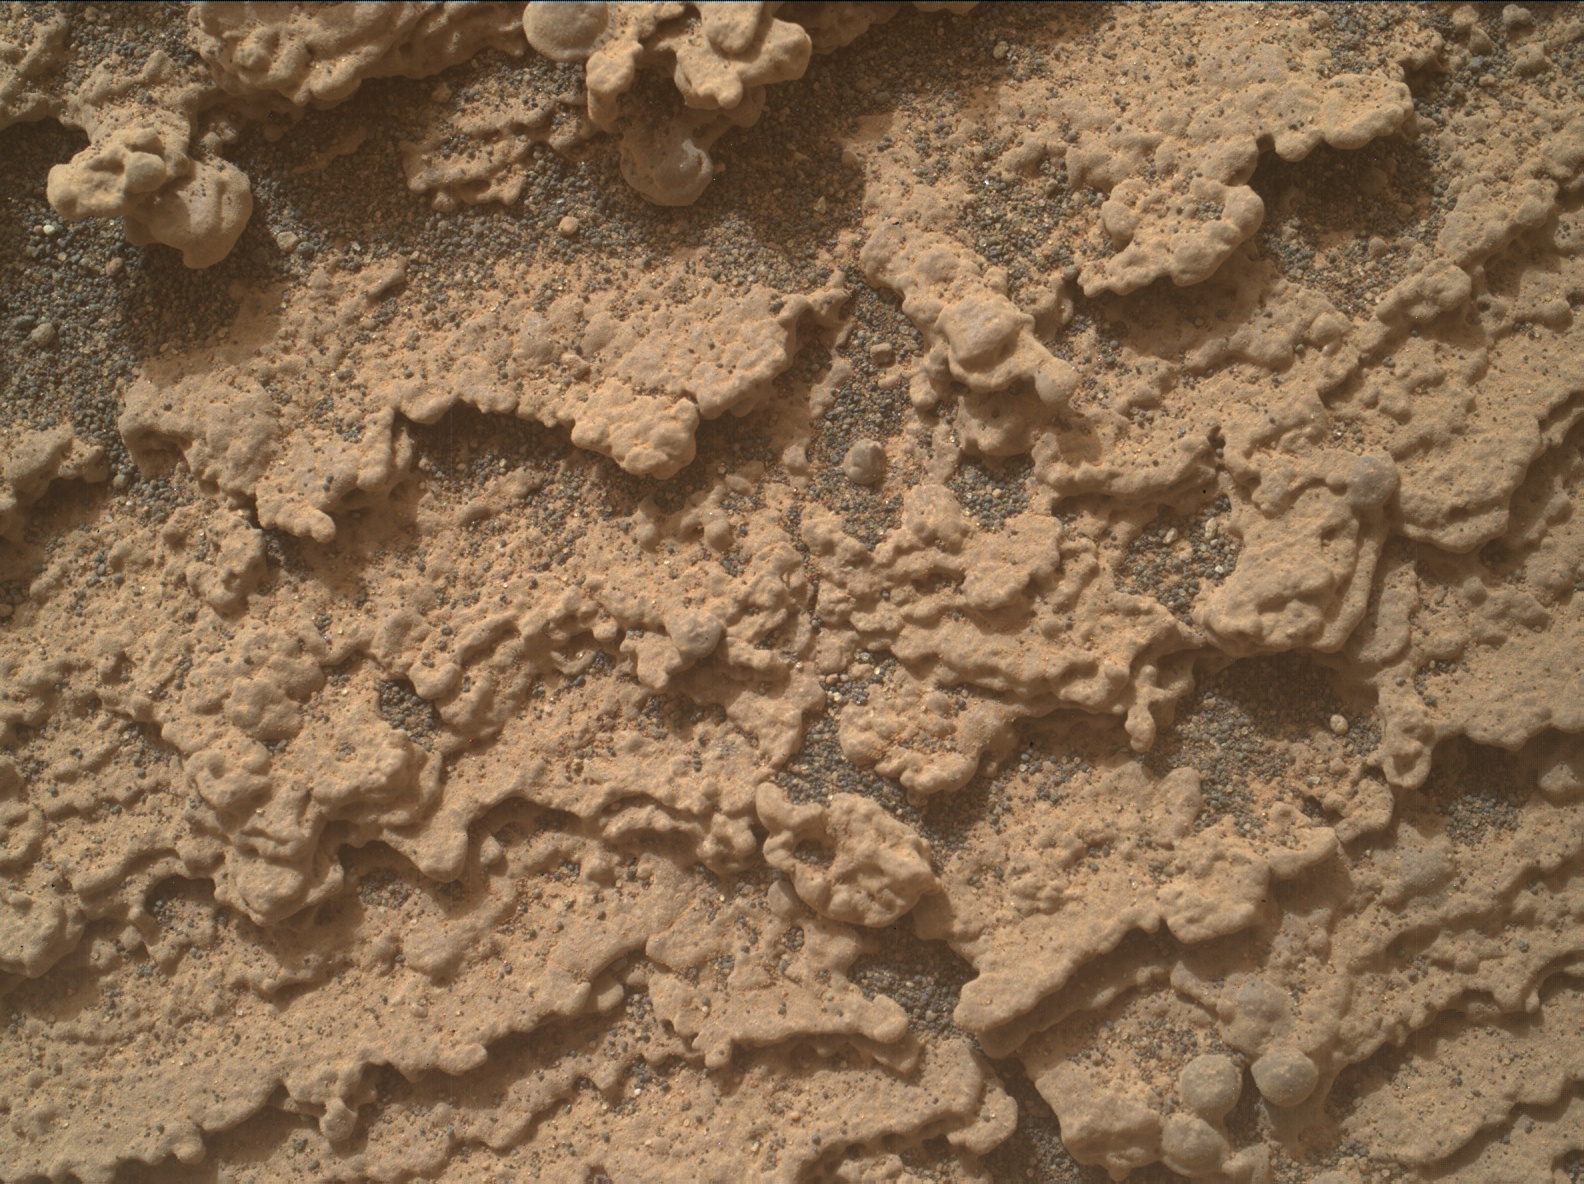 Nasa's Mars rover Curiosity acquired this image using its Mars Hand Lens Imager (MAHLI) on Sol 3628